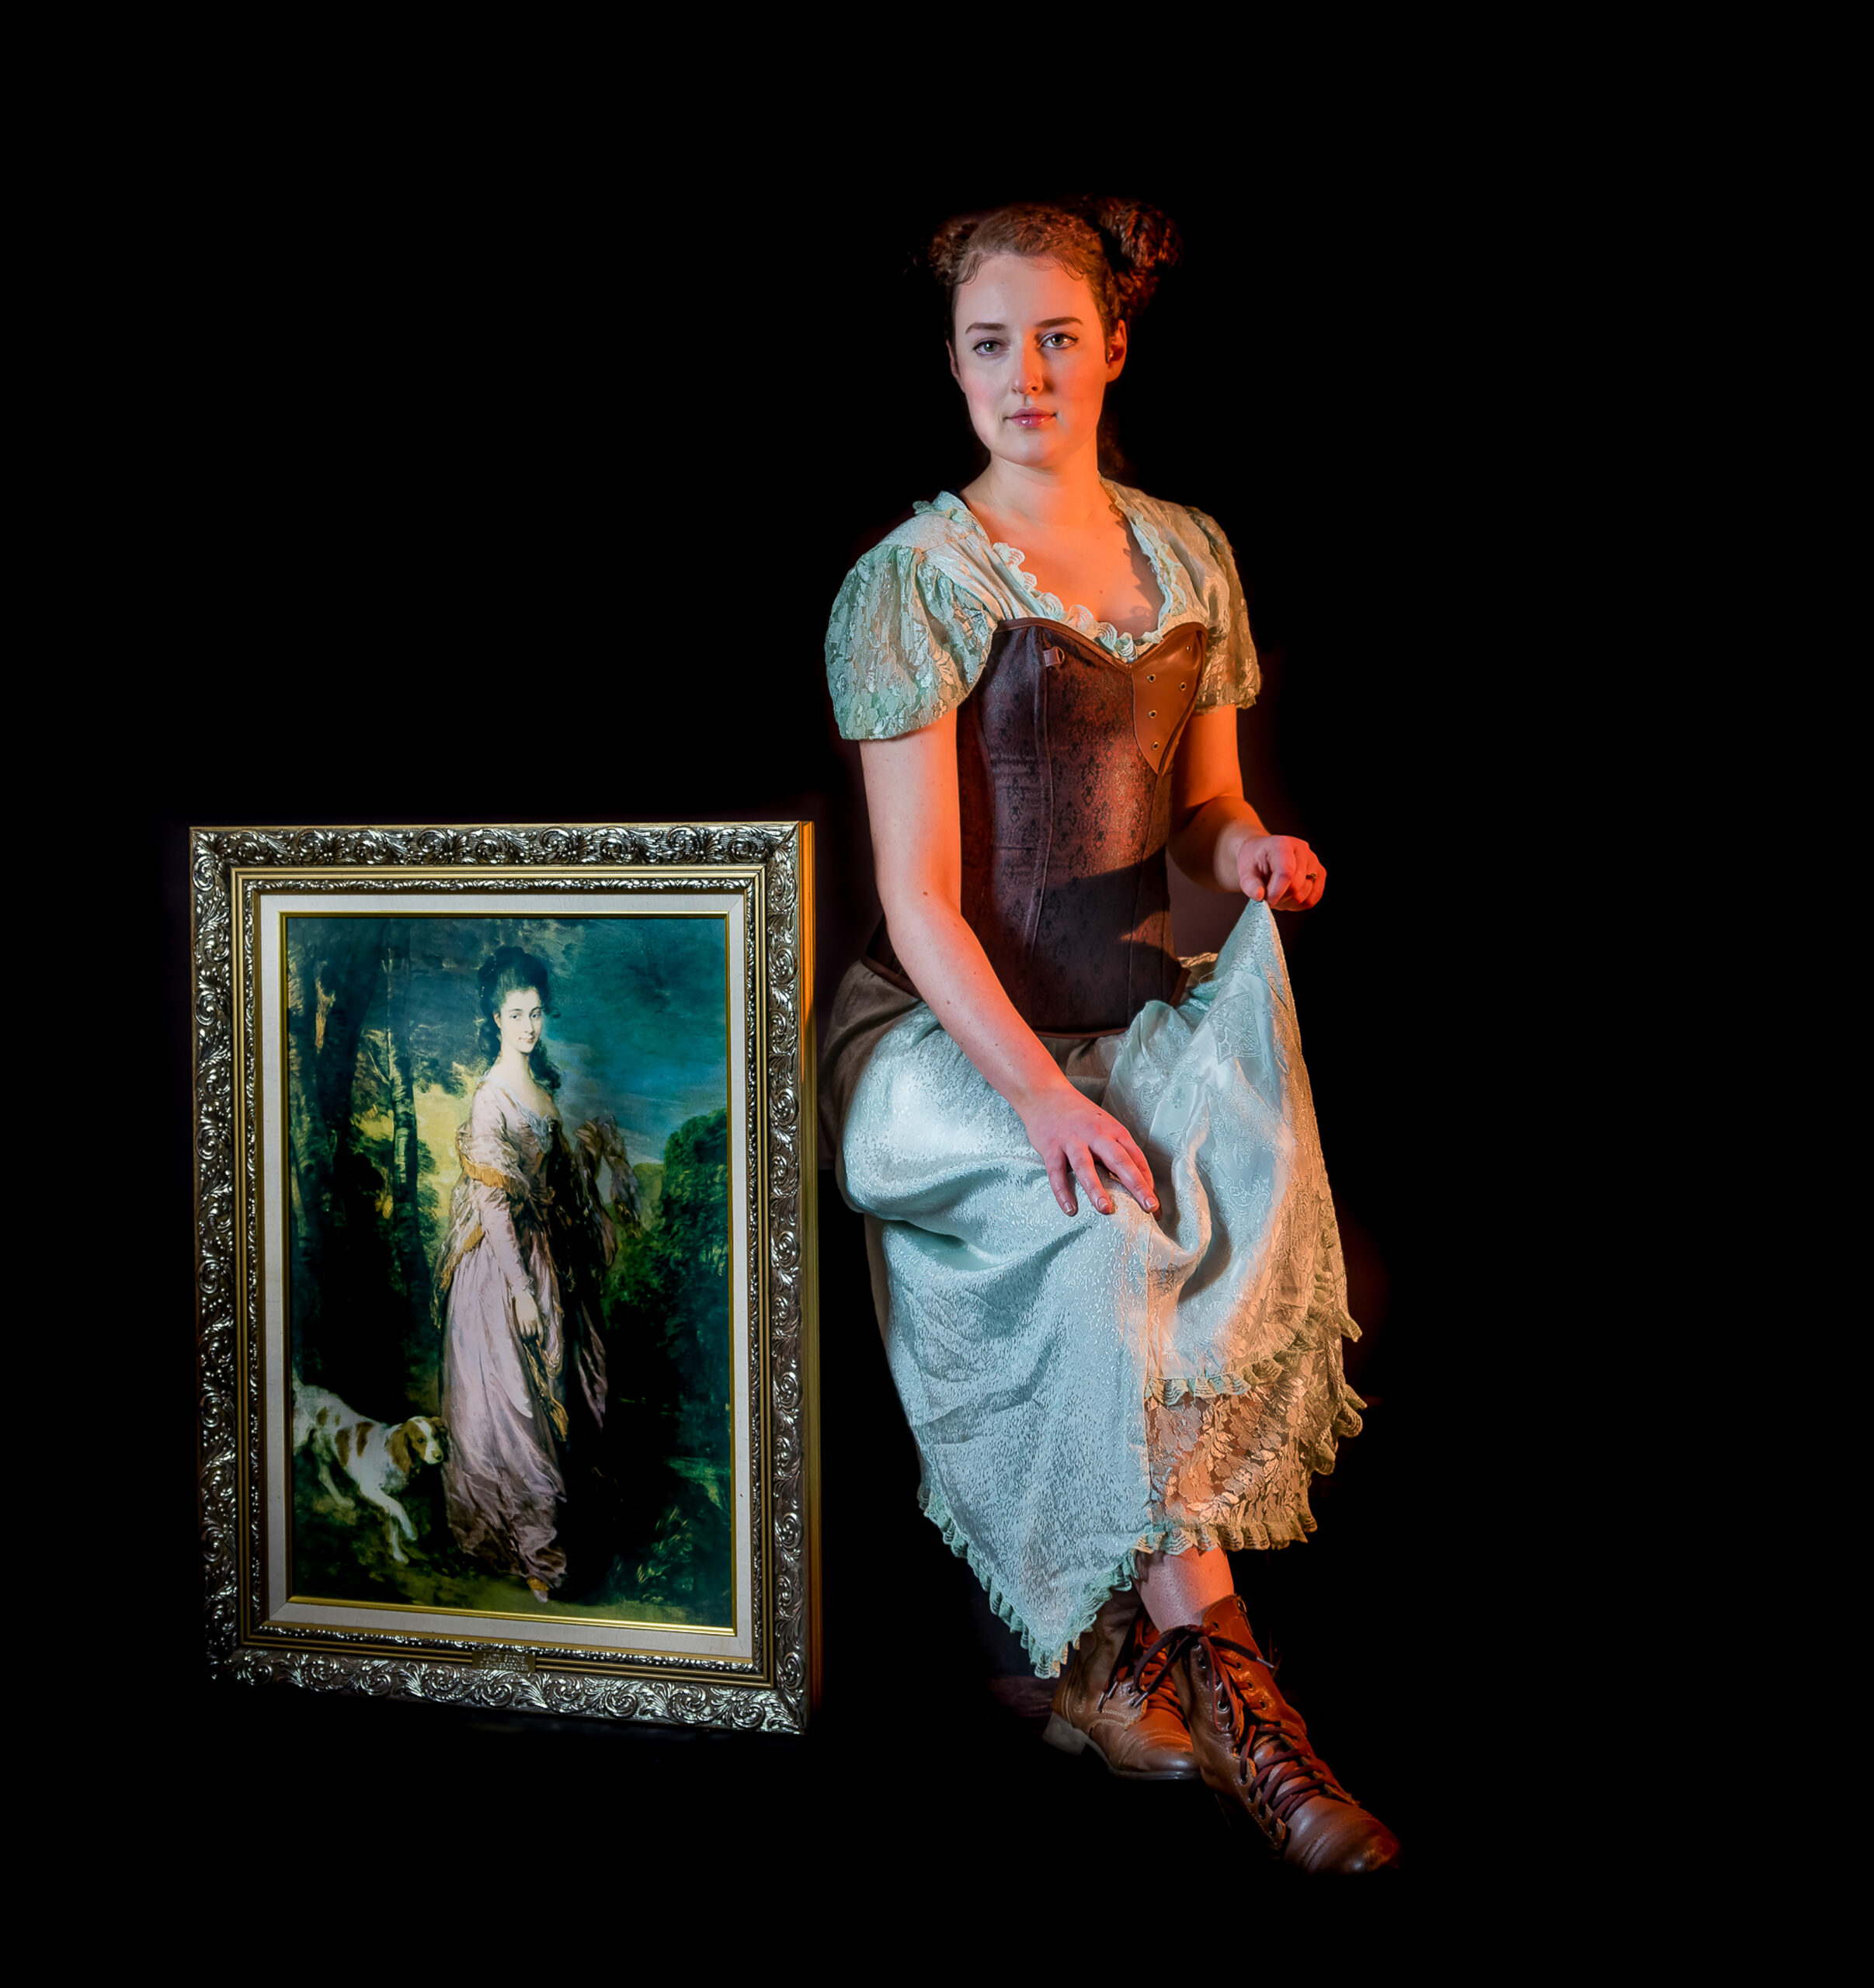 Image shows a photographic portrait of a young woman by a painting of an ancestor for Vince Brophy Artist Profile story with Art Trails Tasmania